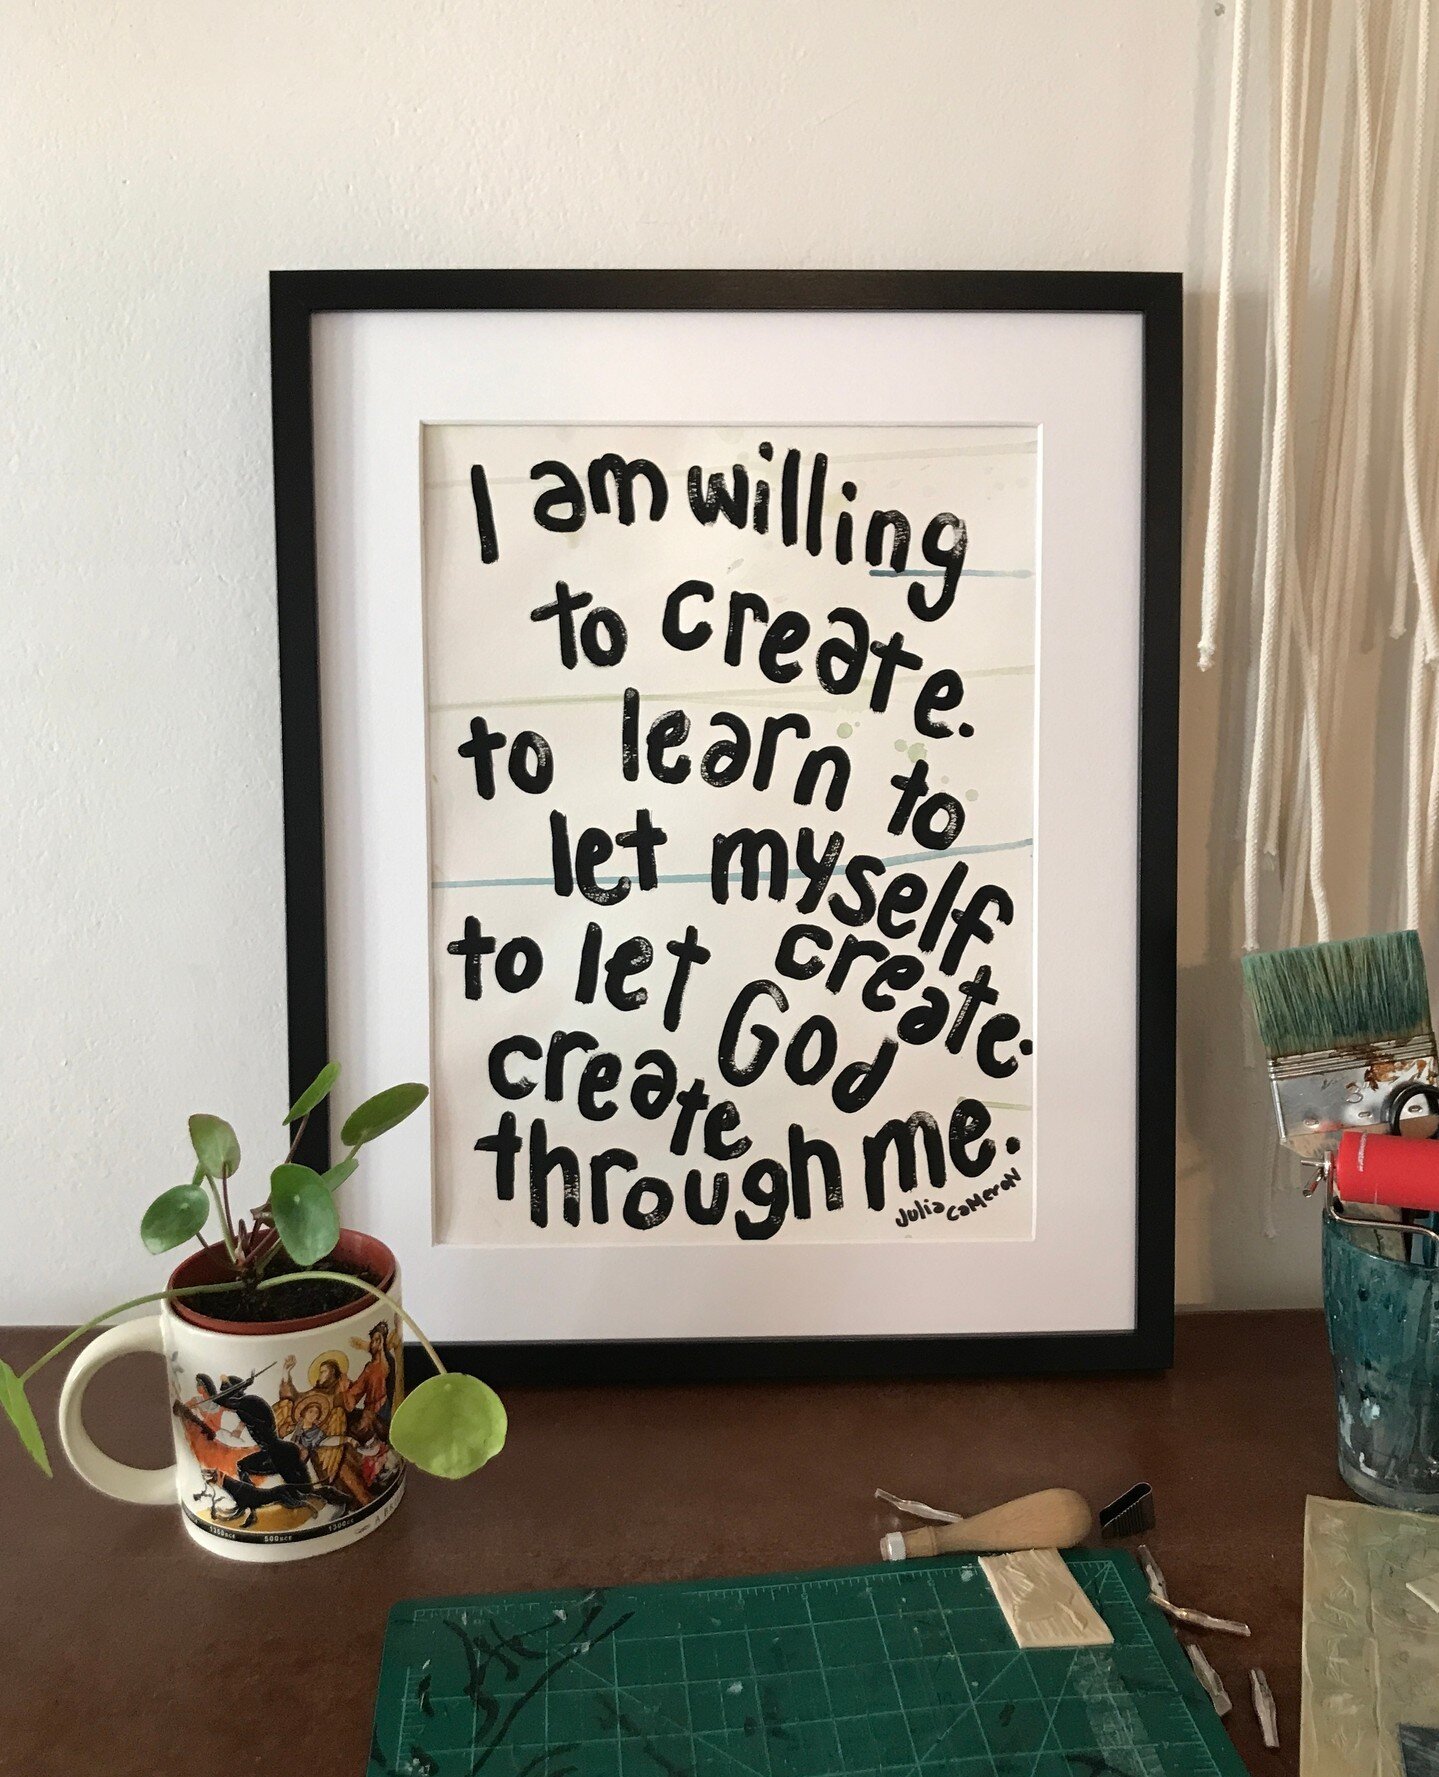 ETSY SHOP UPDATE! (finally 😬)⁠
I might just keep this one for myself....Just kidding, there are PLENTY available! I made prints! ⁠
⁠
Added up this Artistic Affirmations to the Etsy shop today, hoping to get more things up soon 🤗 So stay tuned!⁠
⁠
⁠